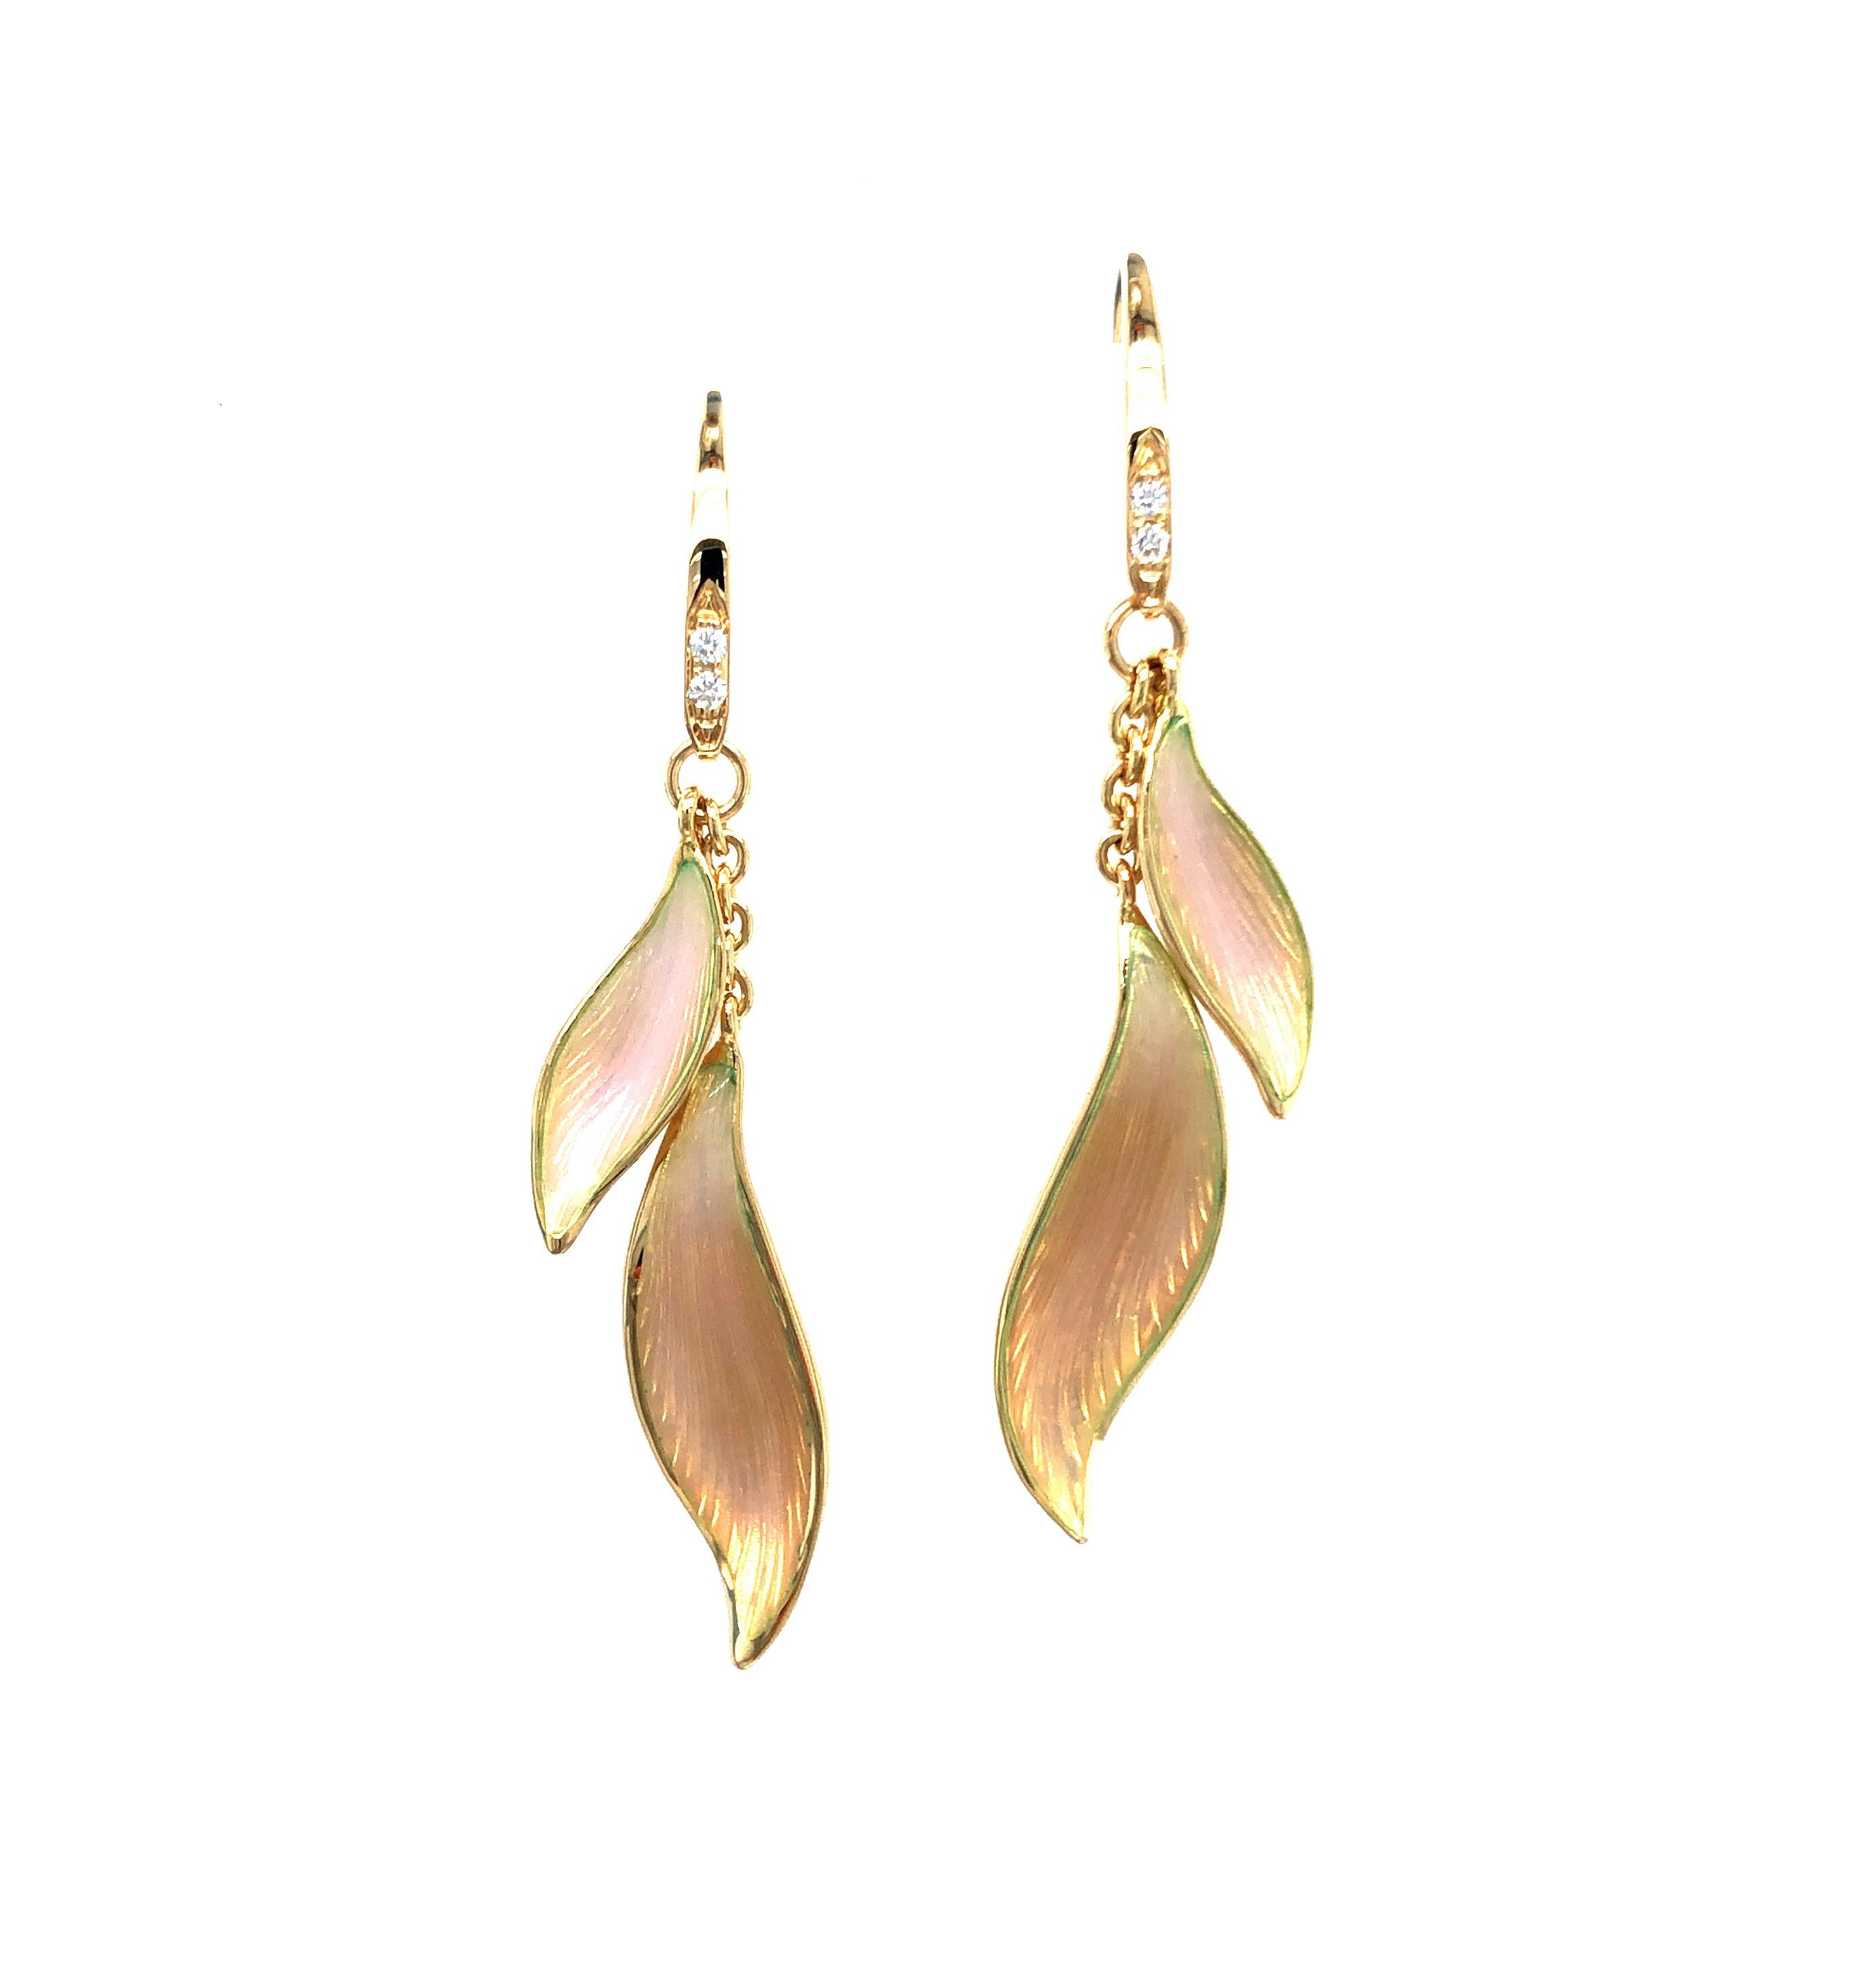 Victor Mayer leave shaped dangle earrings 18k yellow gold, Serenade Collection, translucent opalescent pink vitreous enamel, 4 diamonds, total 0.04 ct, G VS, brilliant cut, measurements length app. 47 mm, leave app. 26 mm x 18 mm

About the creator